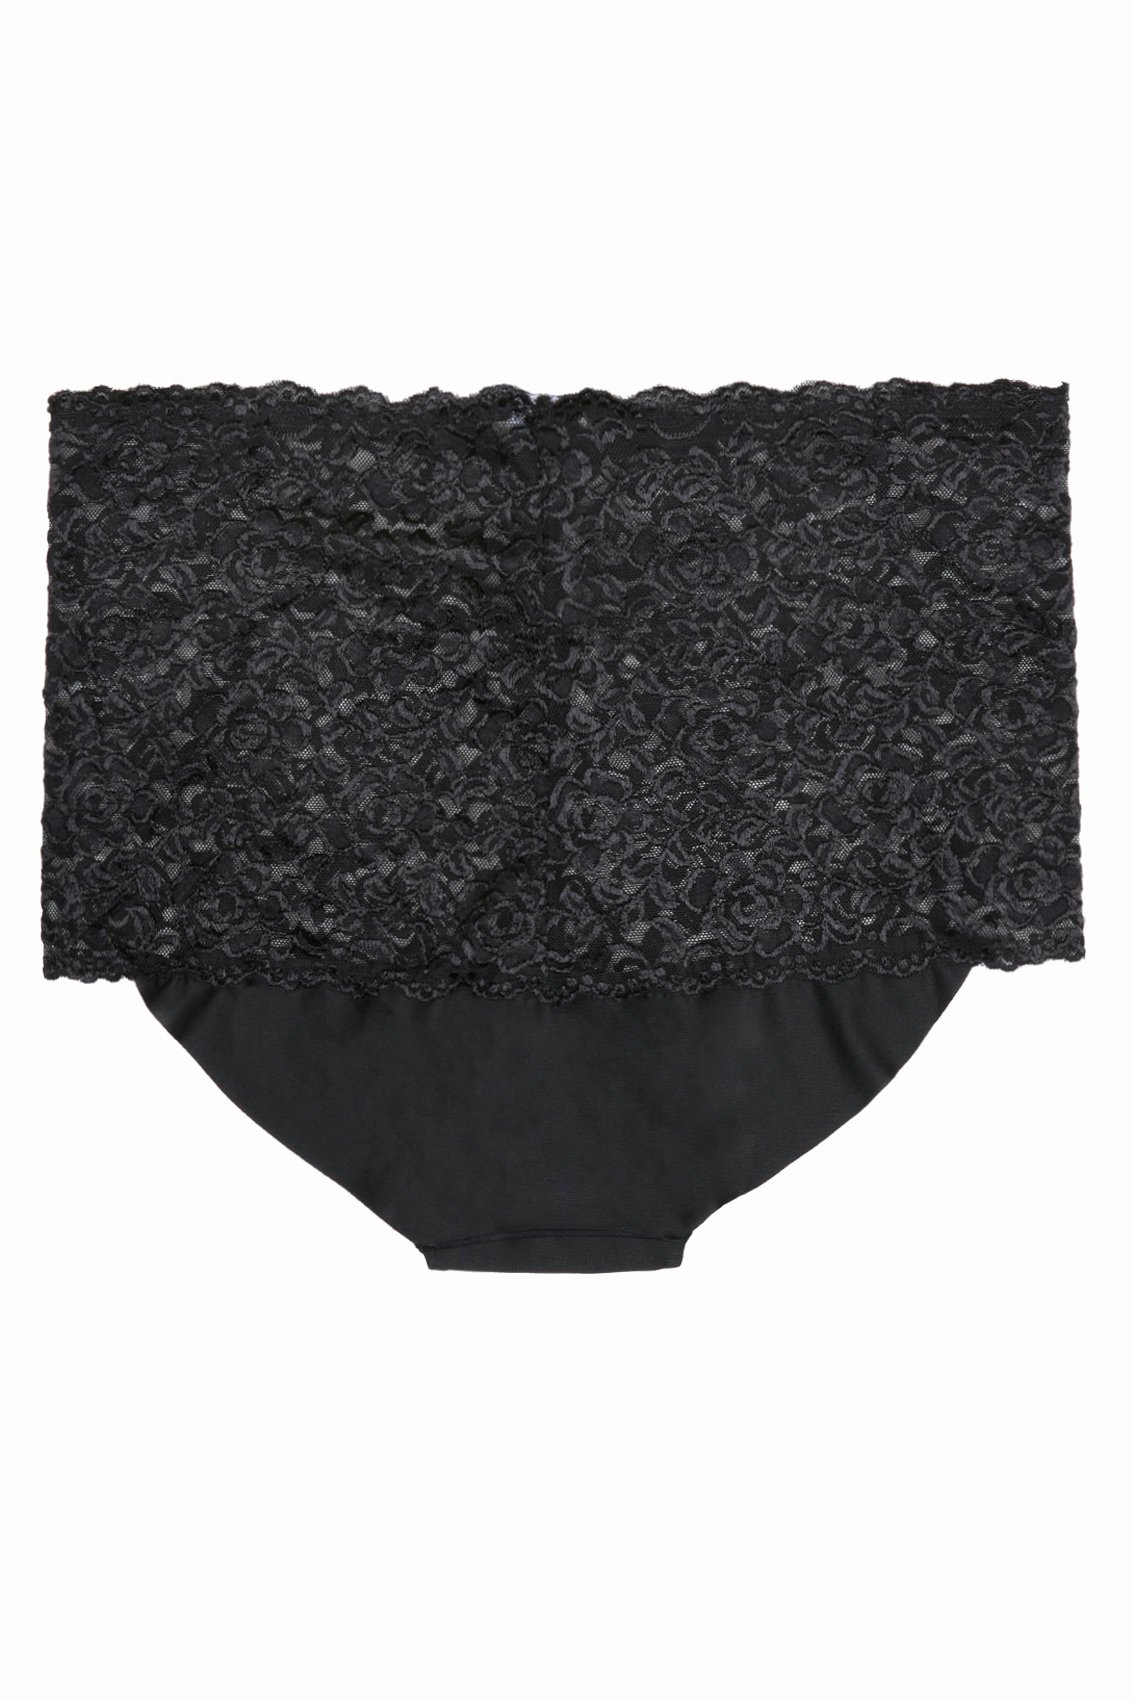 No Refund Policy Template Beautiful Black Shine Lace Shorts